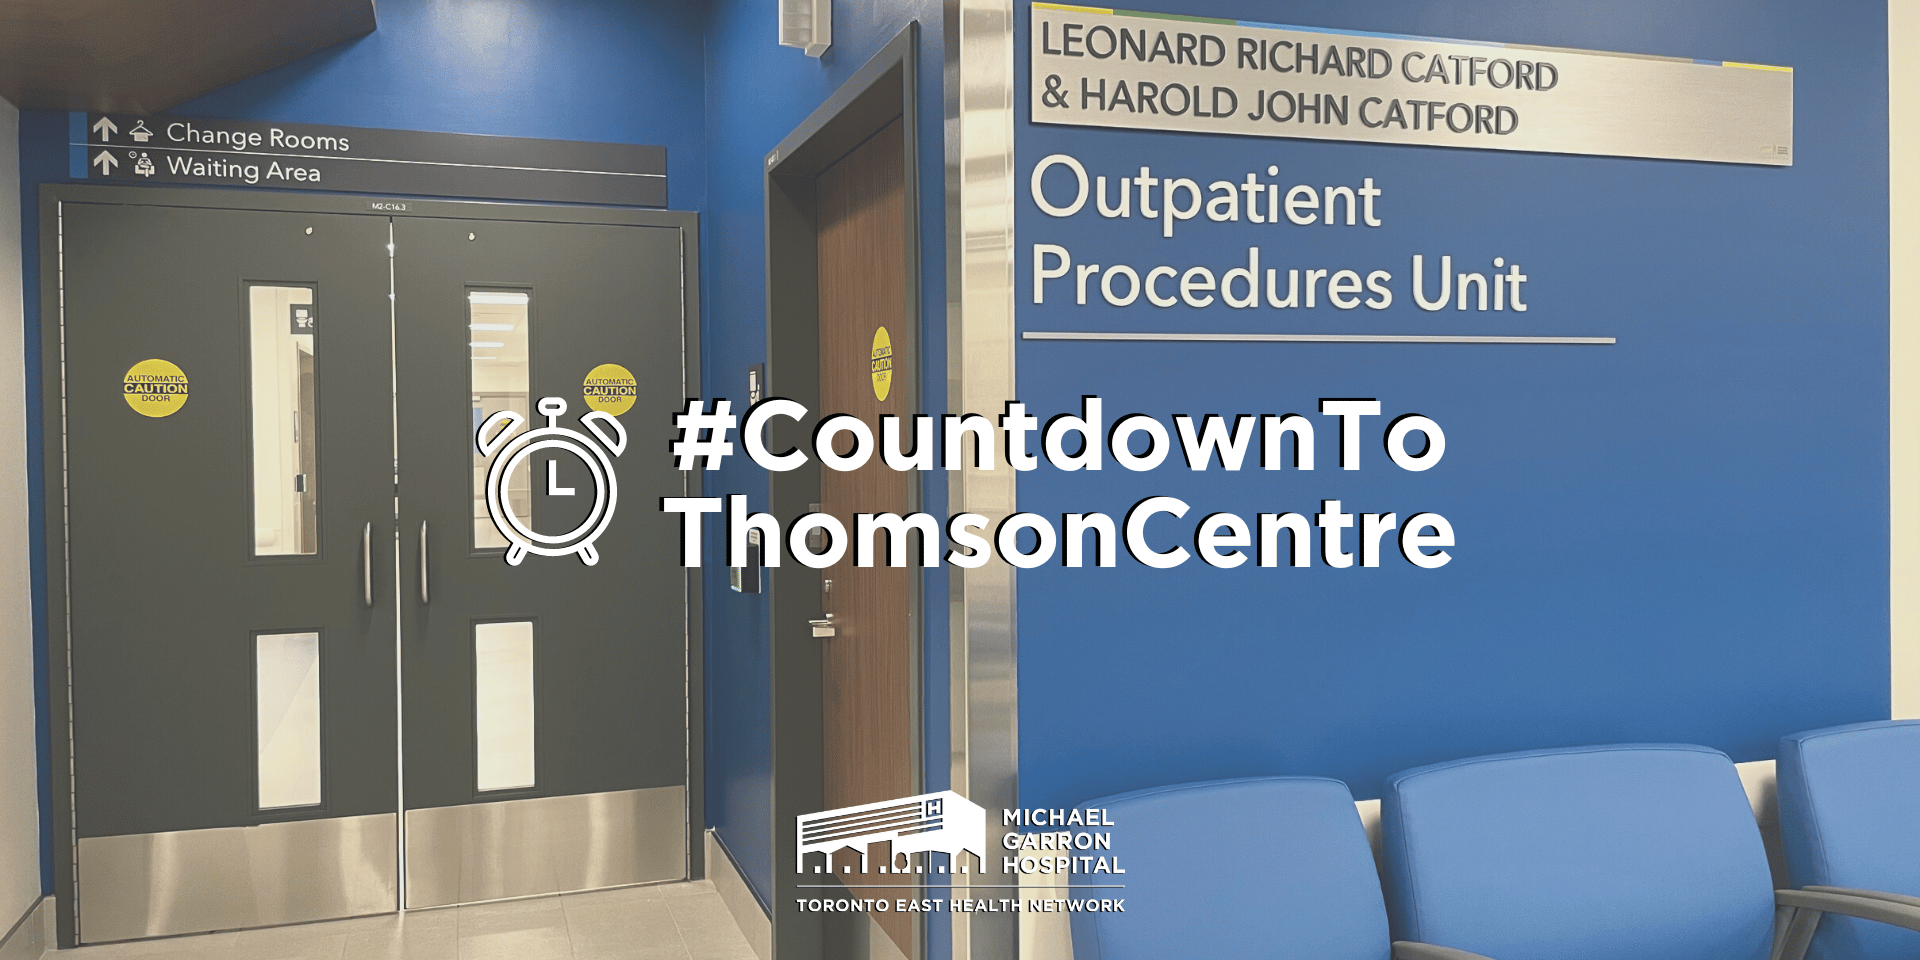 Entrance to the Leonard Richard Catford and Harold John Catford Outpatient Procedures Unit in the Thomson Centre.